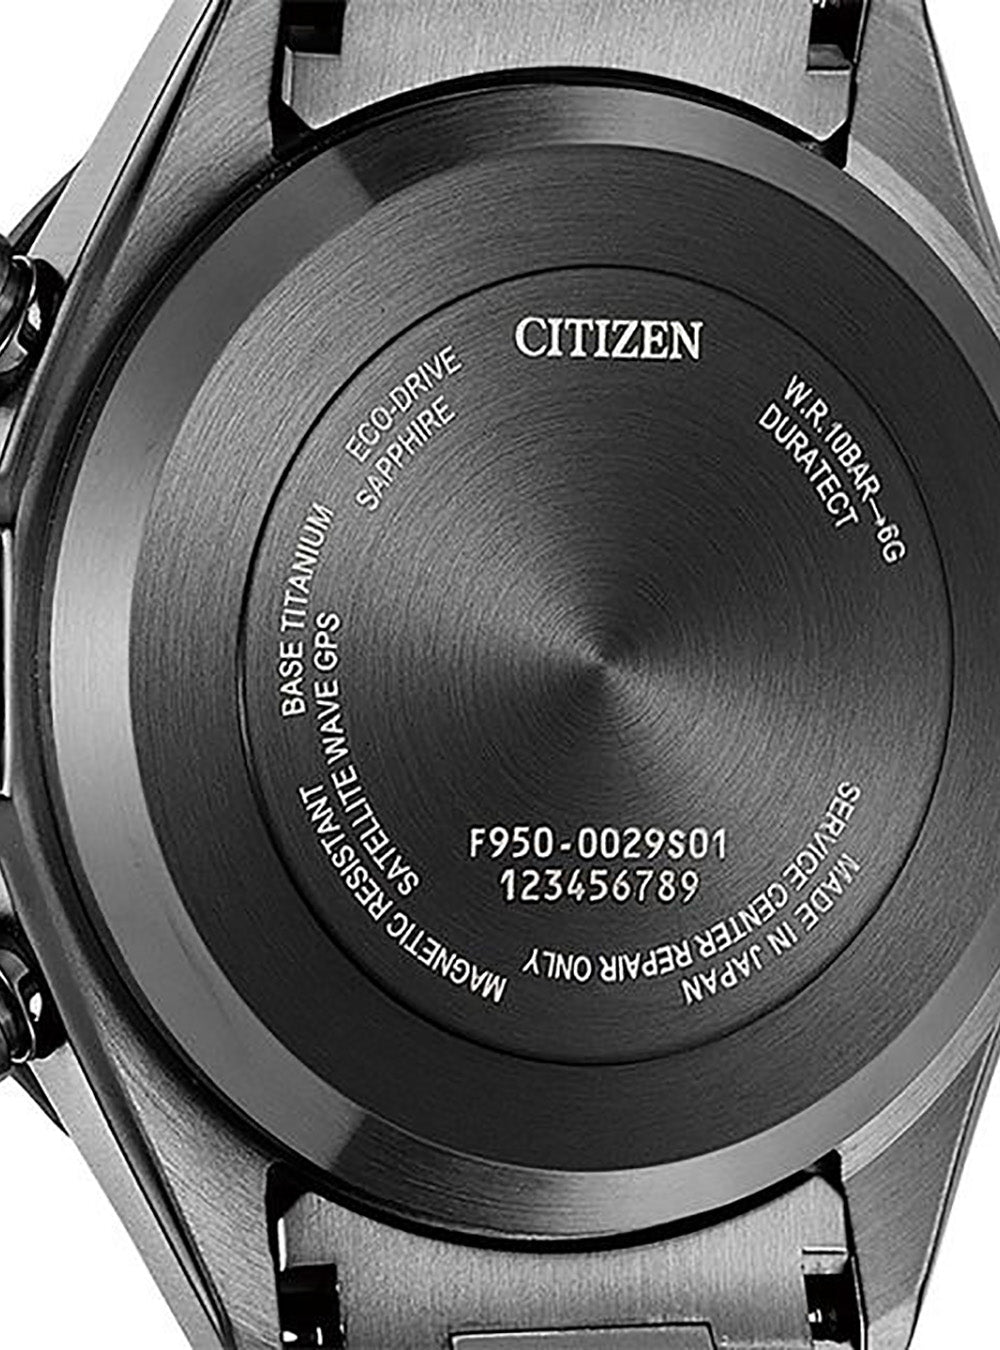 New Arrival! Citizen Attesa Full Titanium Recycled Polycarbonate Dial!  Unite with Blue! - YouTube